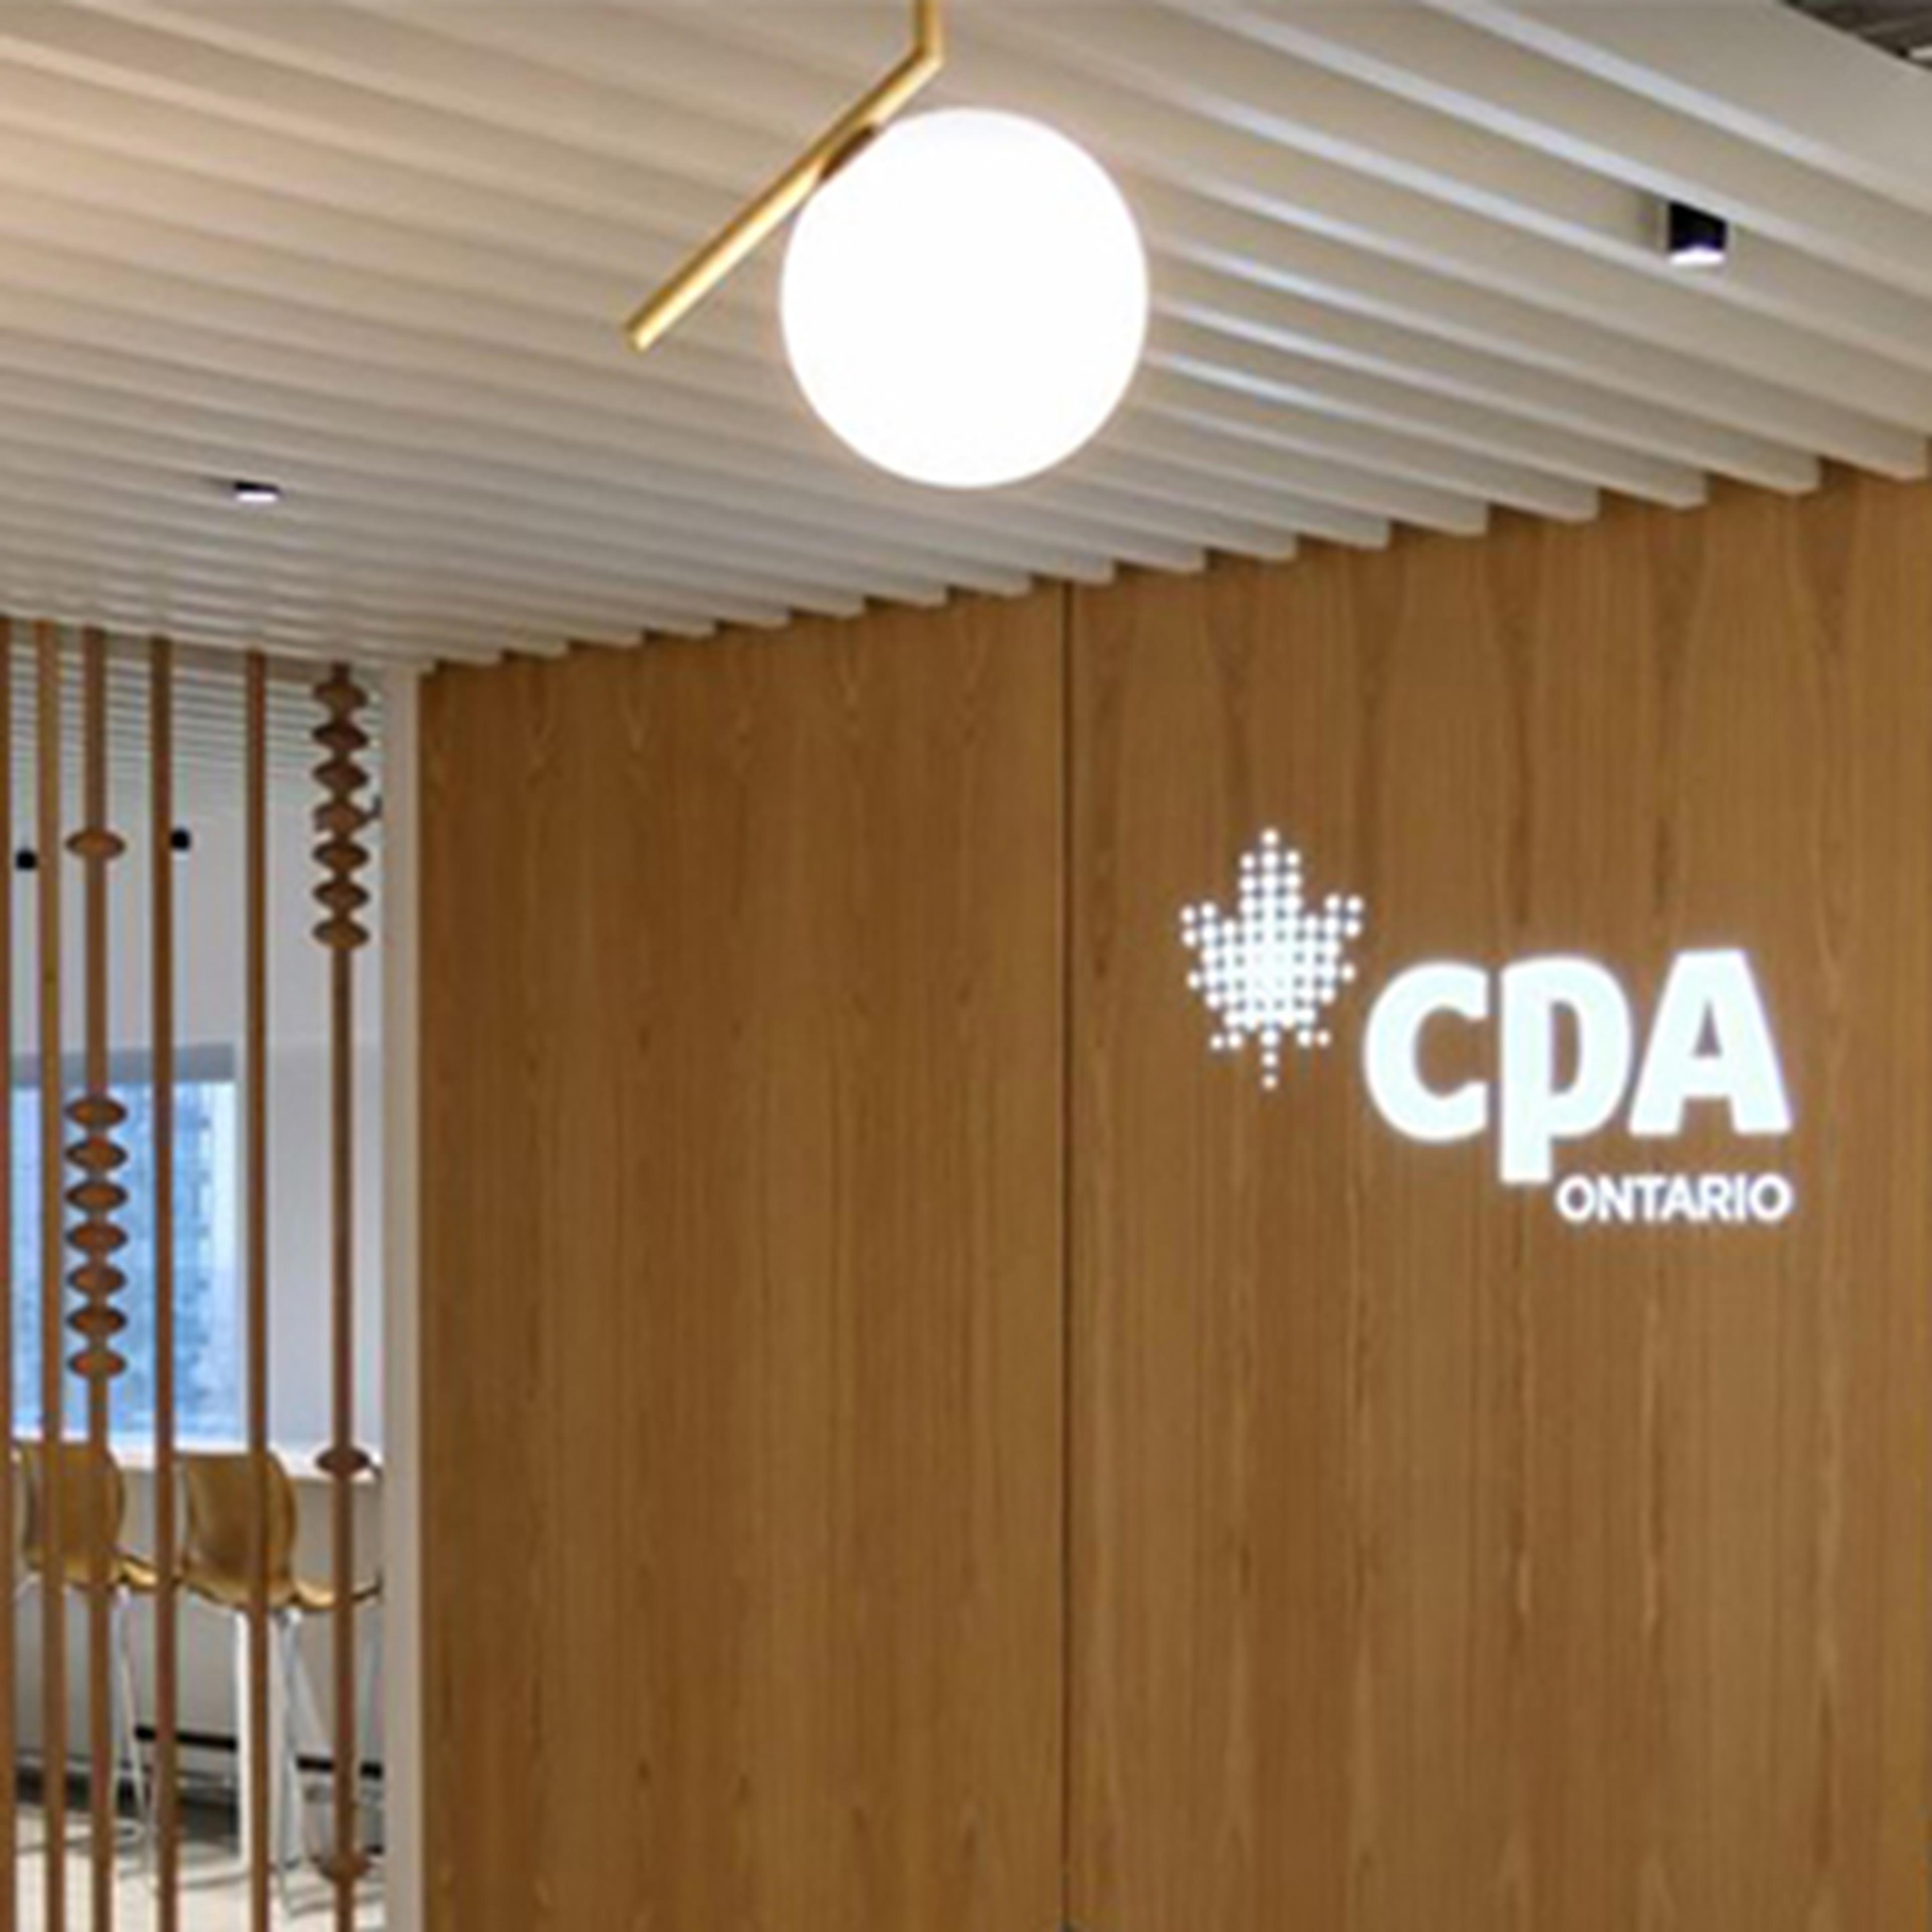 CPA Ontario's office